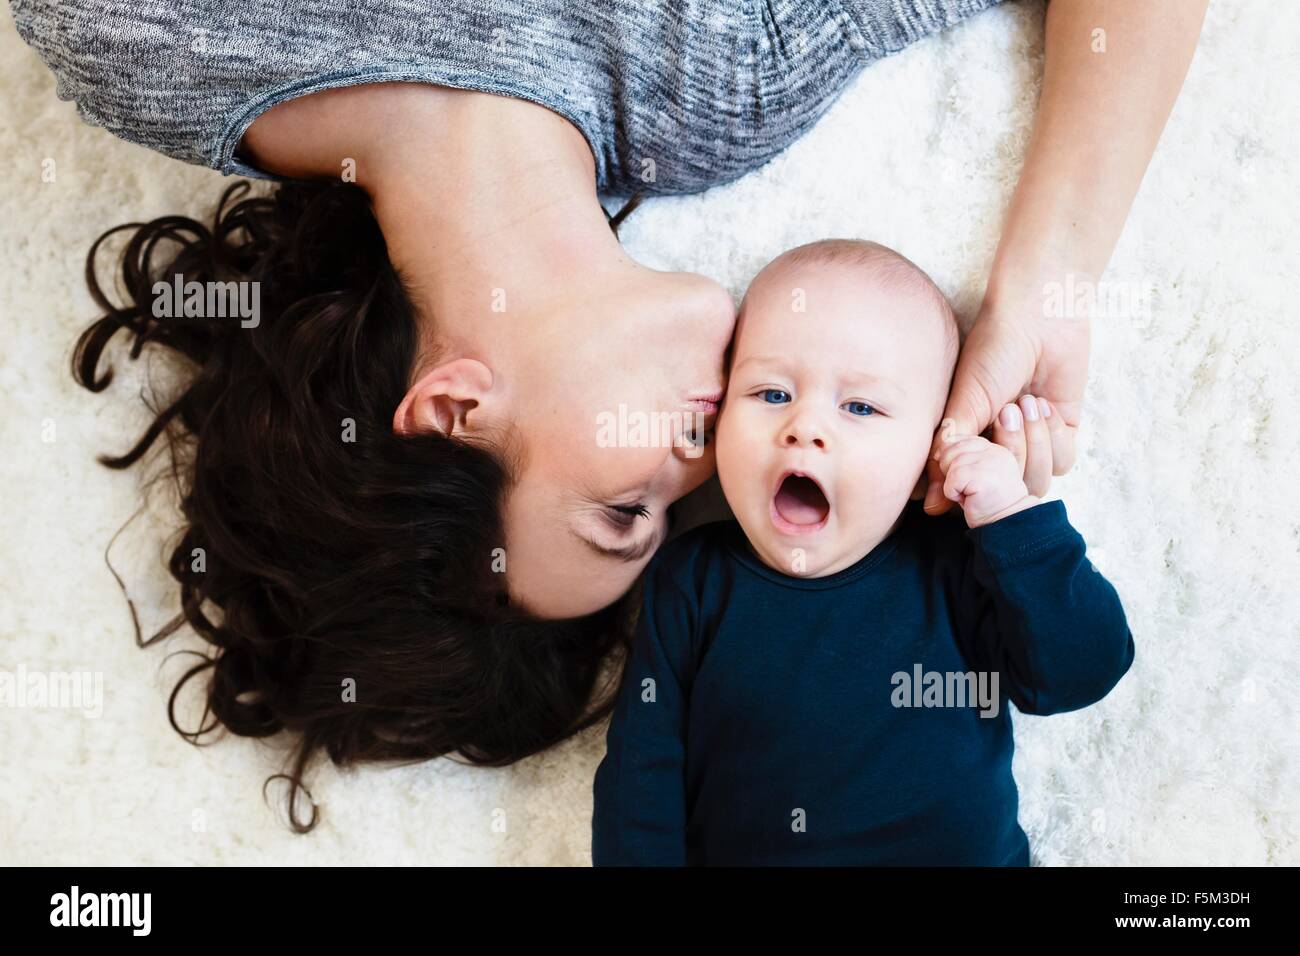 Mother lying on rug and kissing baby son on cheek, overhead view Stock Photo